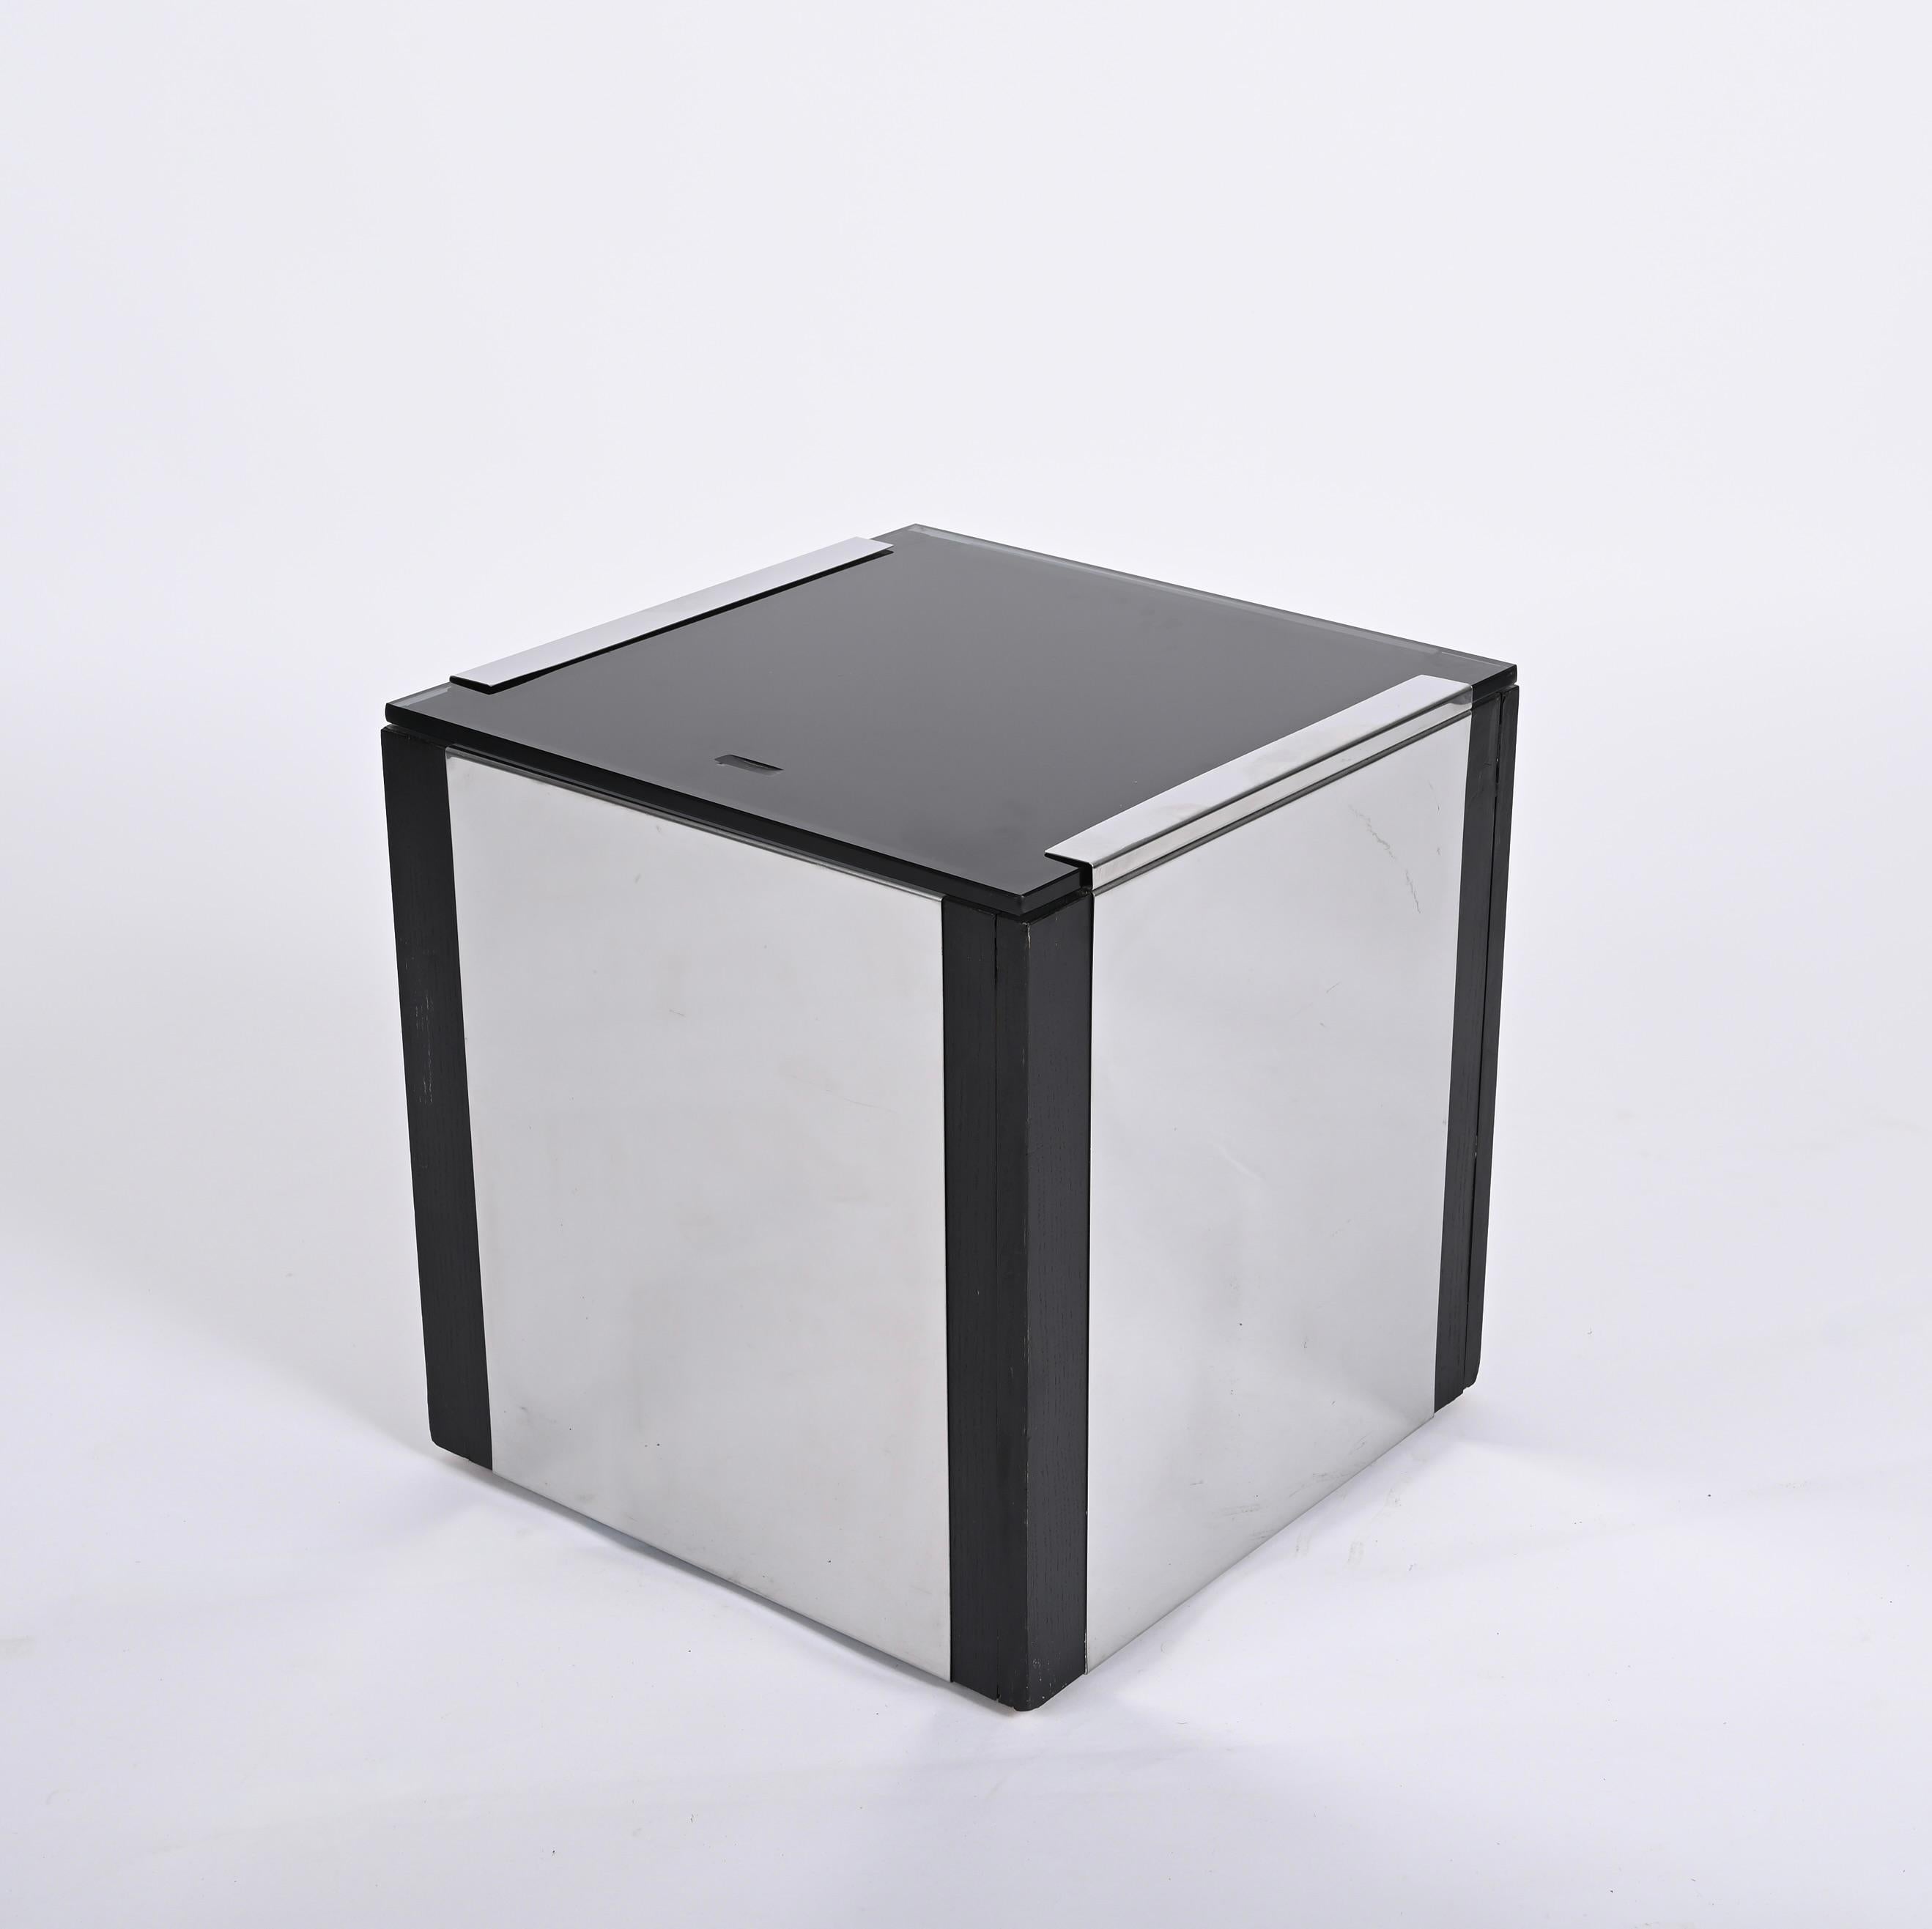 Willy Rizzo Midcentury Cubic Chromed Steel, Wood and Glass Dry Bar, Italy 1970s For Sale 1